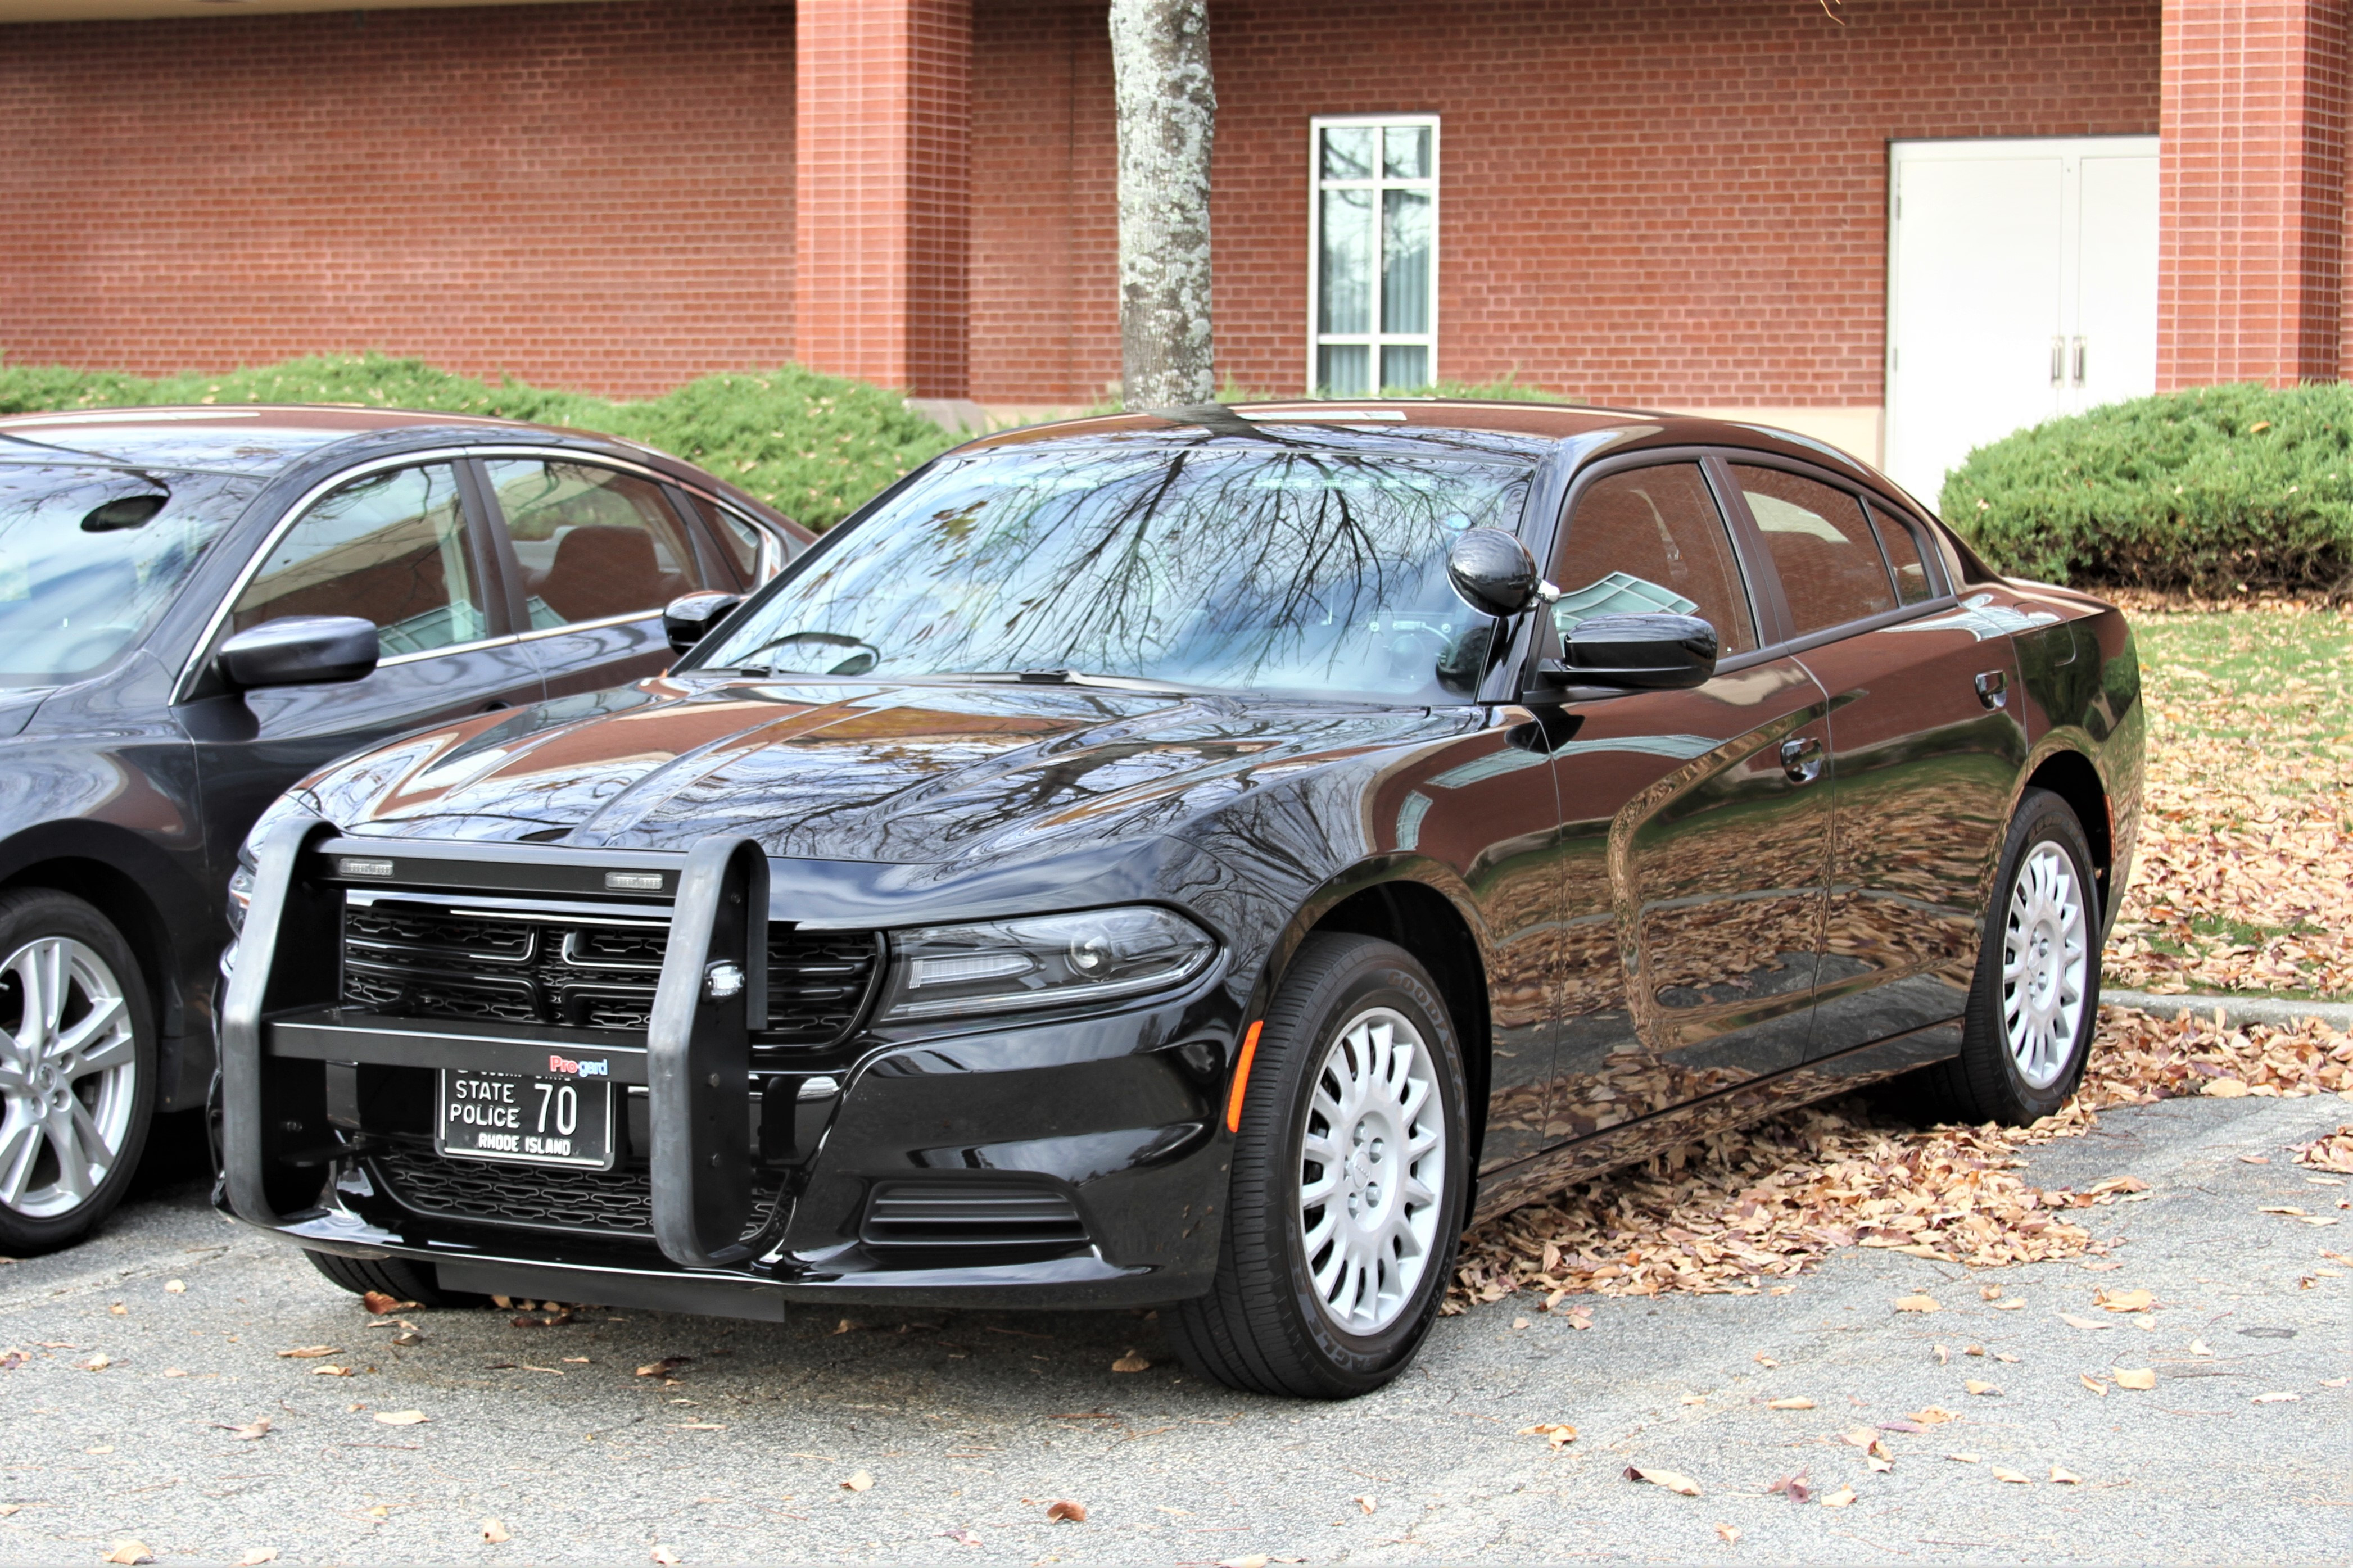 A photo  of Rhode Island State Police
            Cruiser 70, a 2021 Dodge Charger             taken by Richard Schmitter